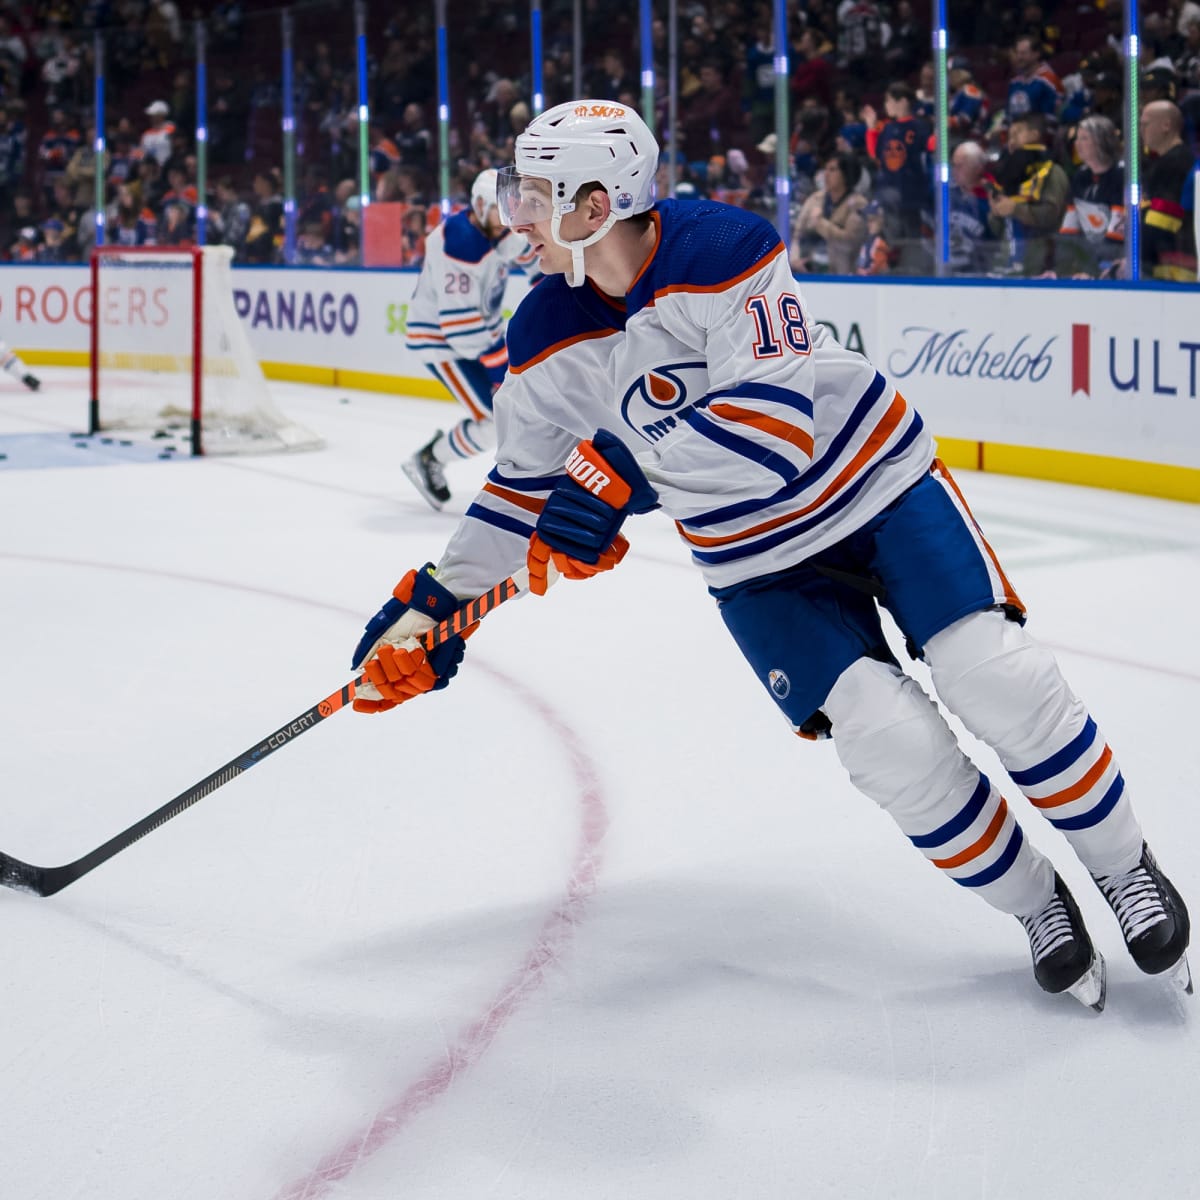 Oilers' Zach Hyman is compelled to speak up about antisemitism when he sees  it - The Athletic